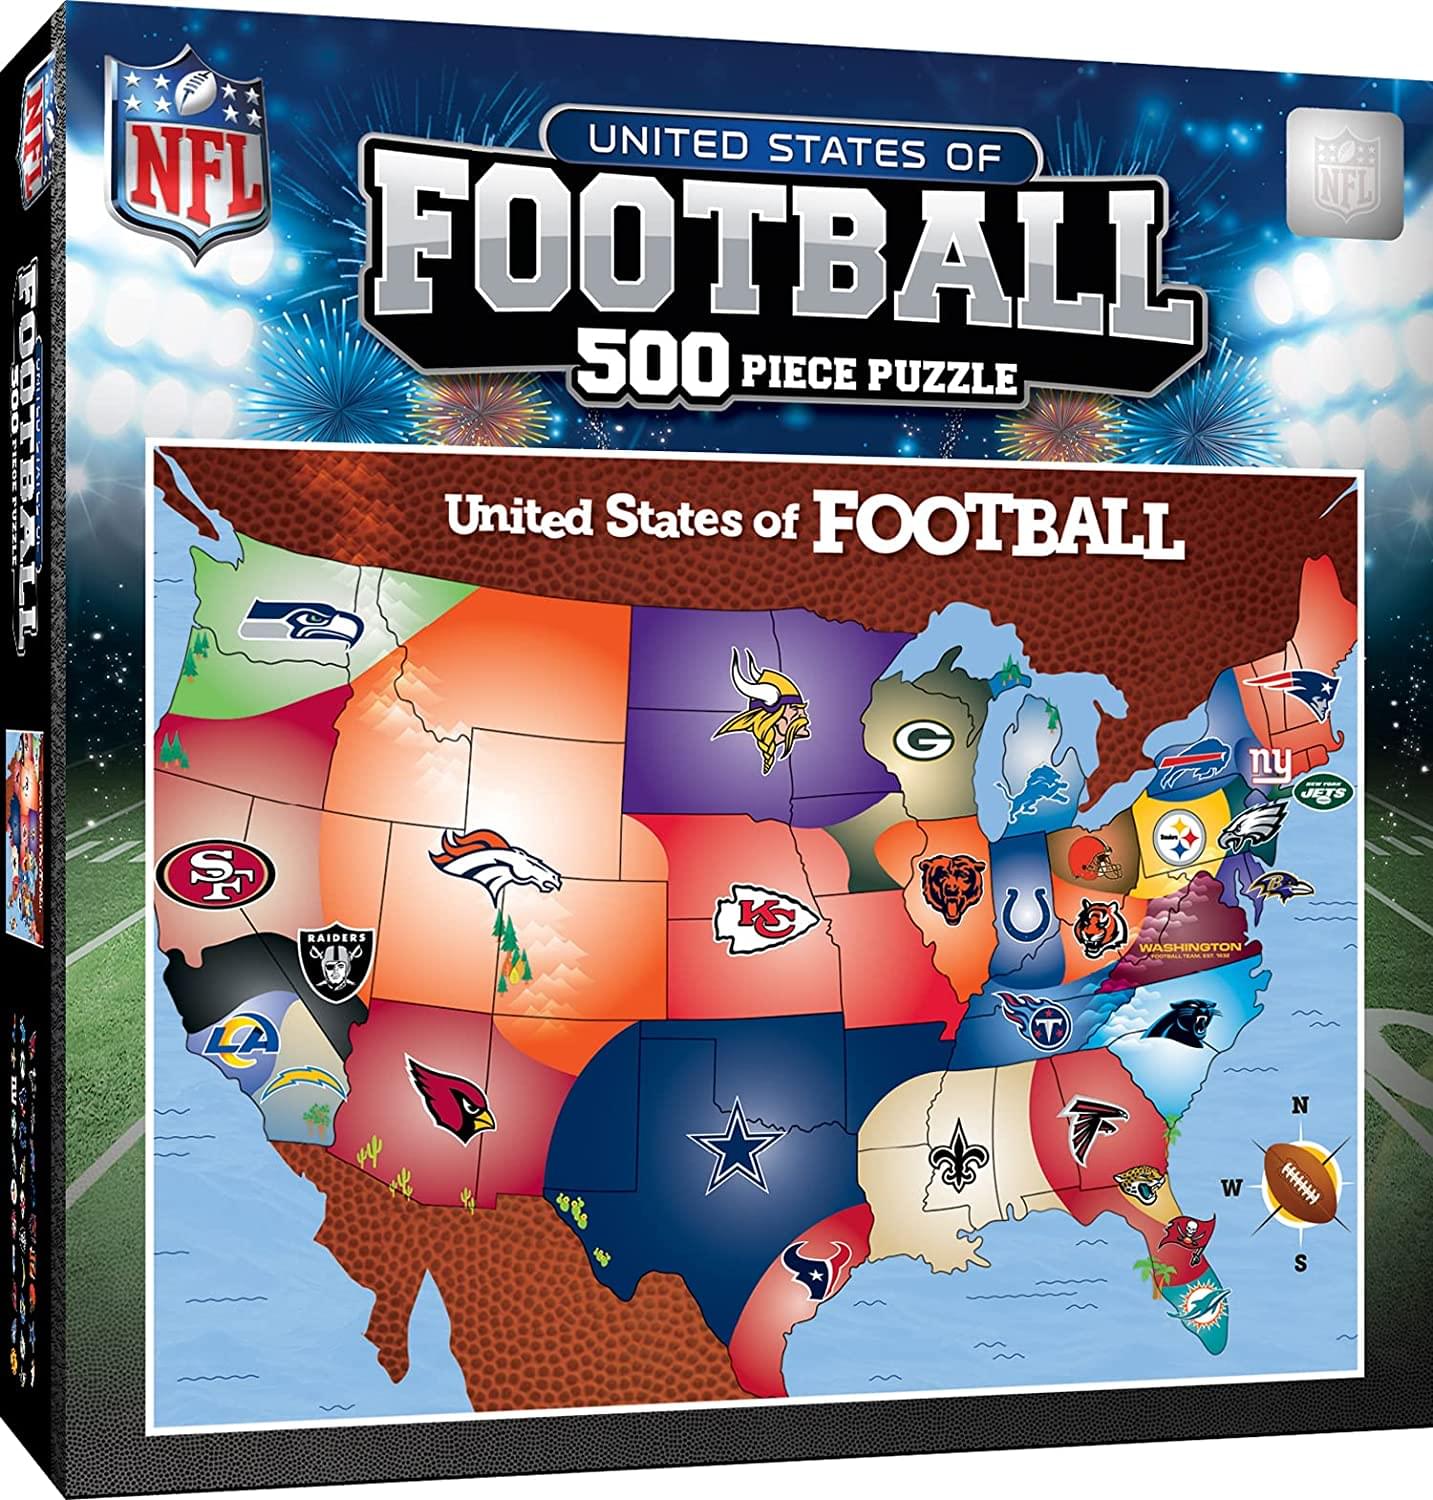 United States of Football 500 Piece Jigsaw Puzzle